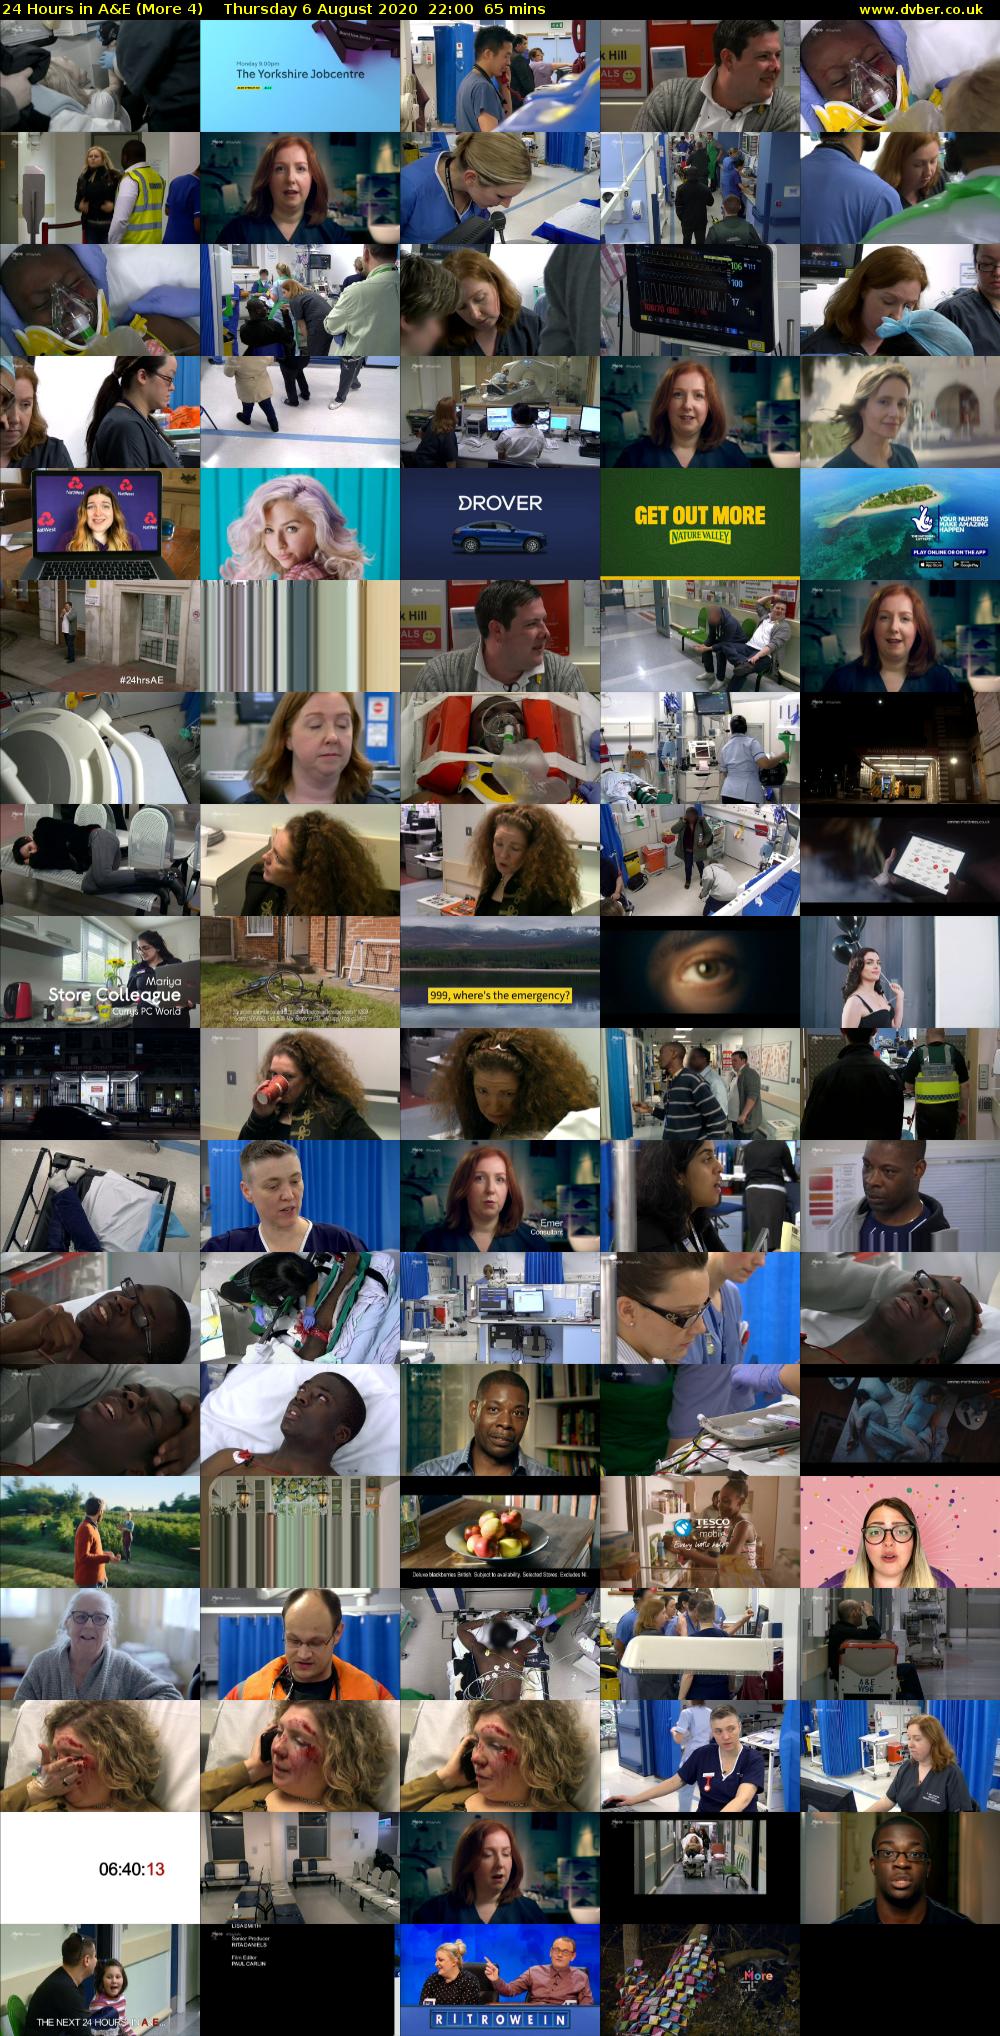 24 Hours in A&E (More 4) Thursday 6 August 2020 22:00 - 23:05